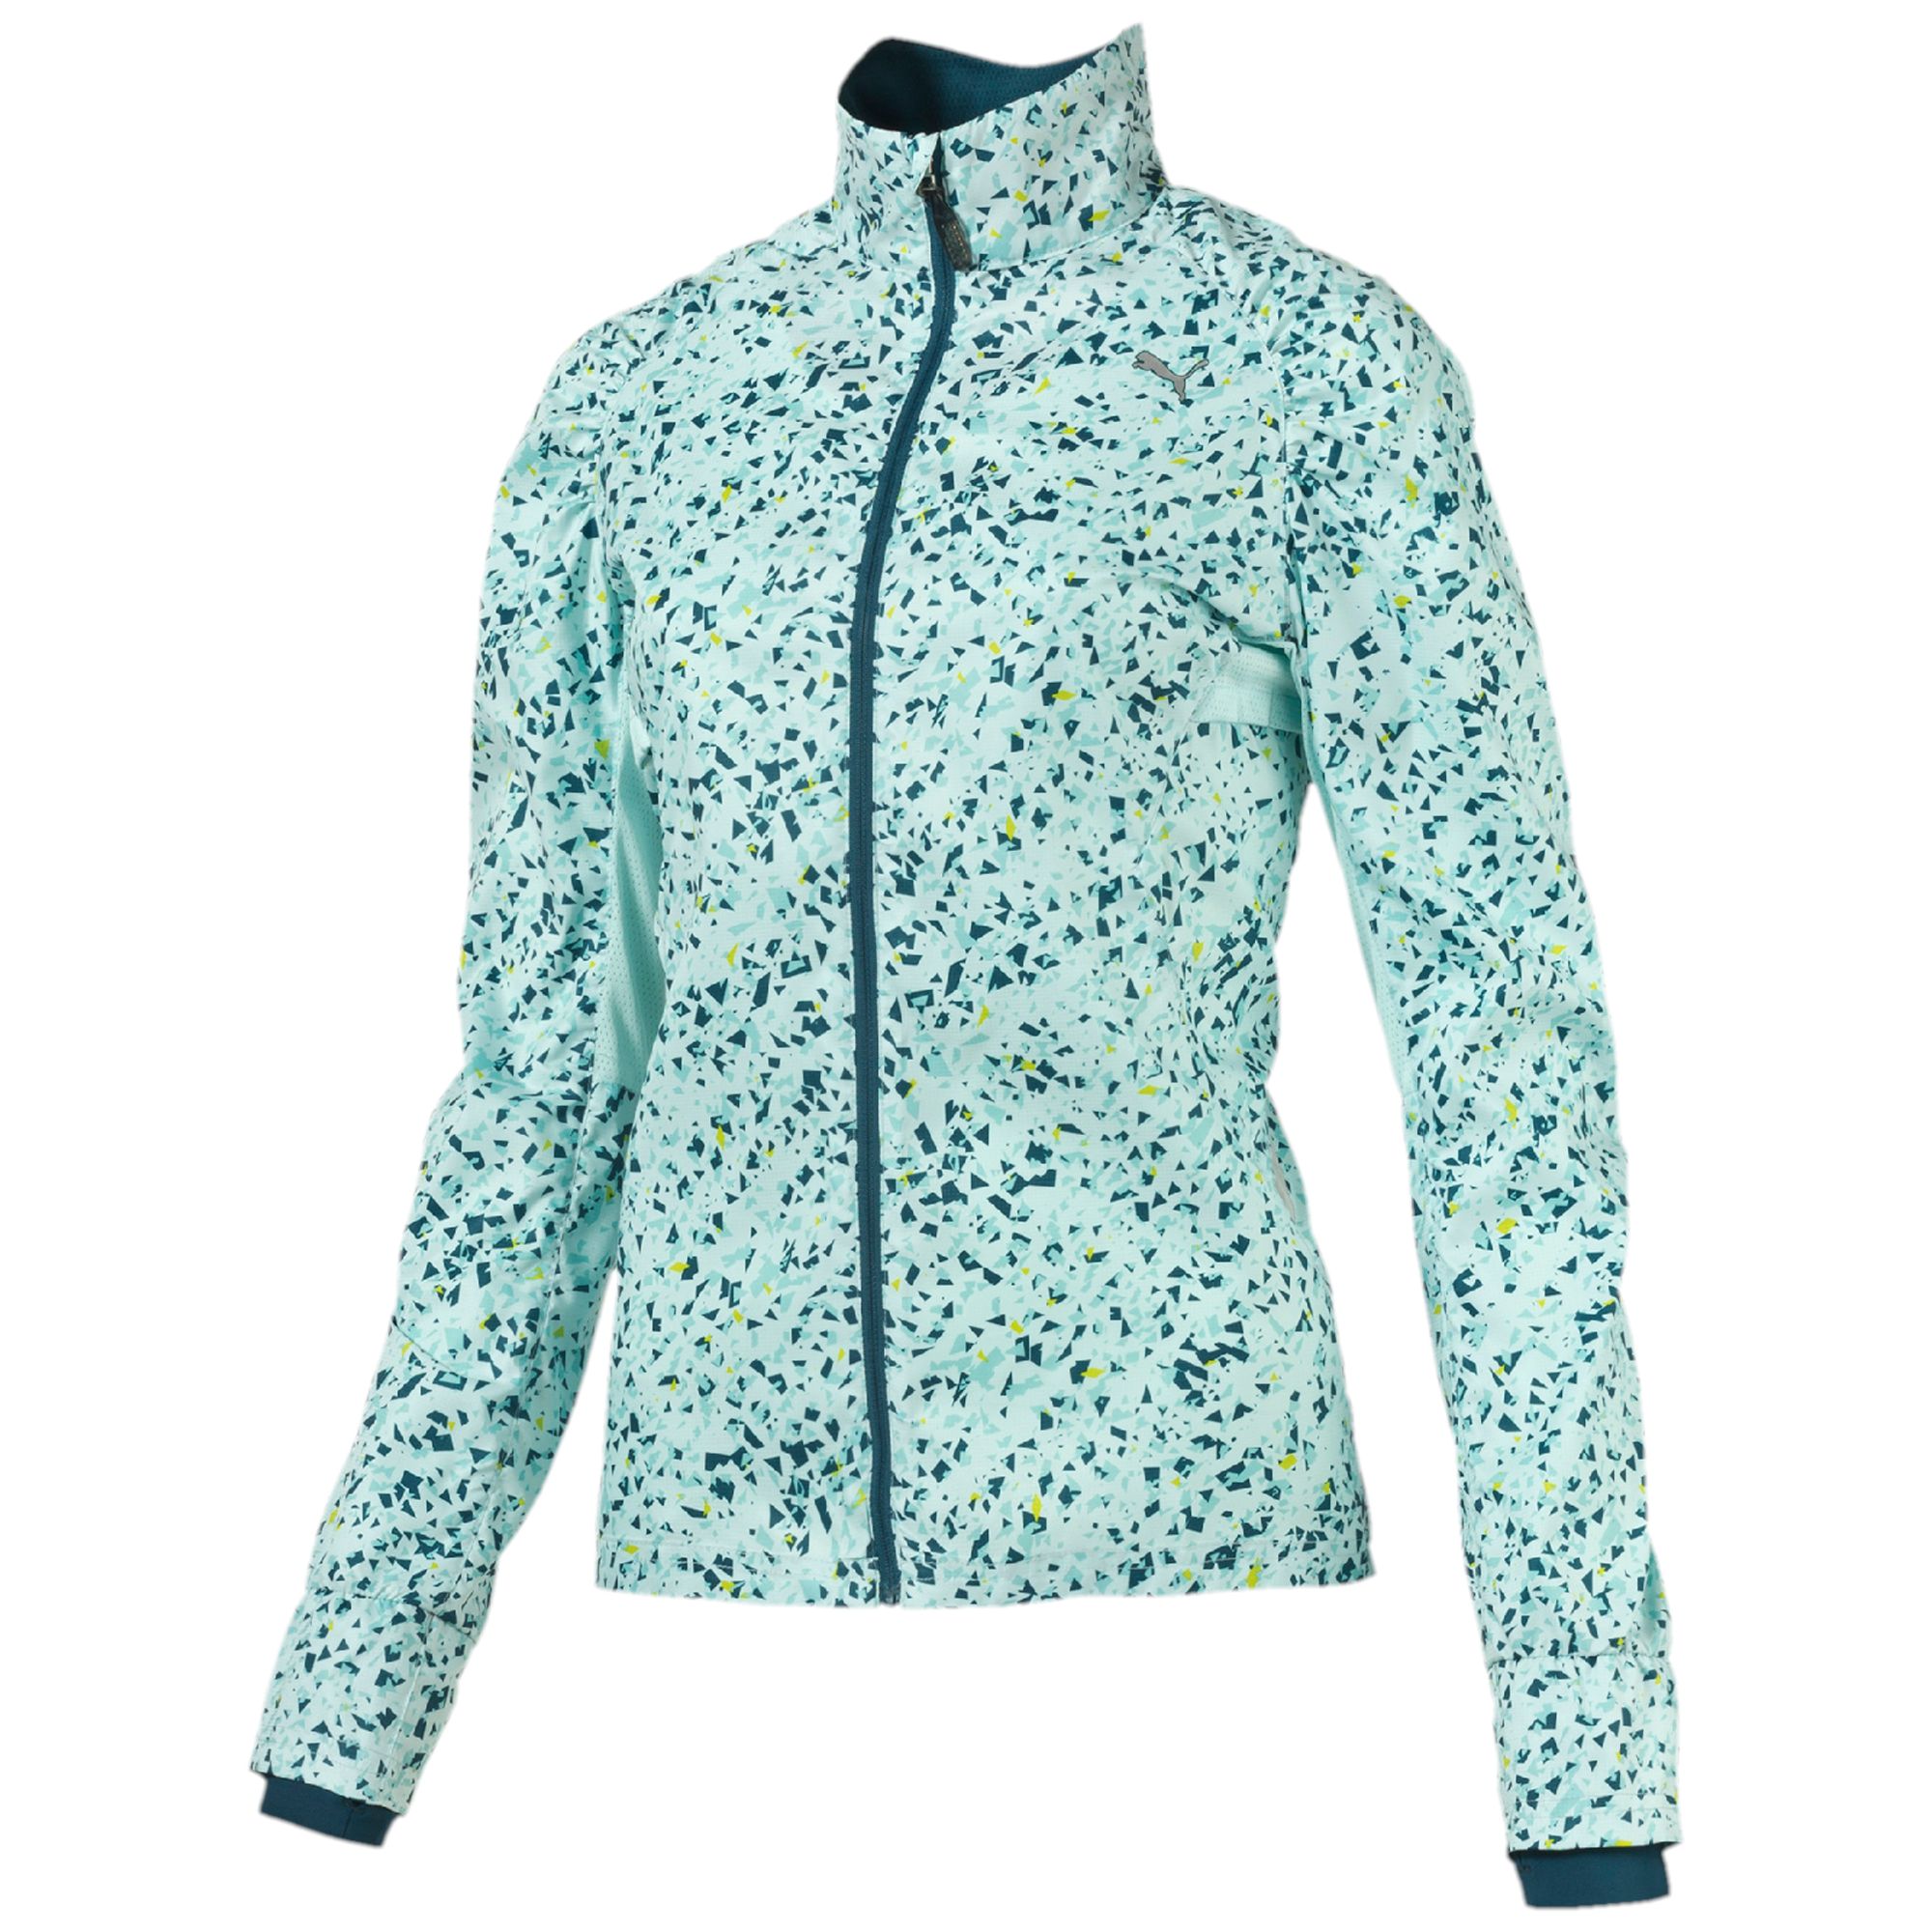  Graphic Woven Jacket W - Puma<br> Graphic Woven Jacket W        Graphic Woven Jacket W        .  ,     windCELL,      ,            .   ,      PUMA,           .: - 2015 : 100%                             <br><br>color: <br>size US: M<br>gender: Female